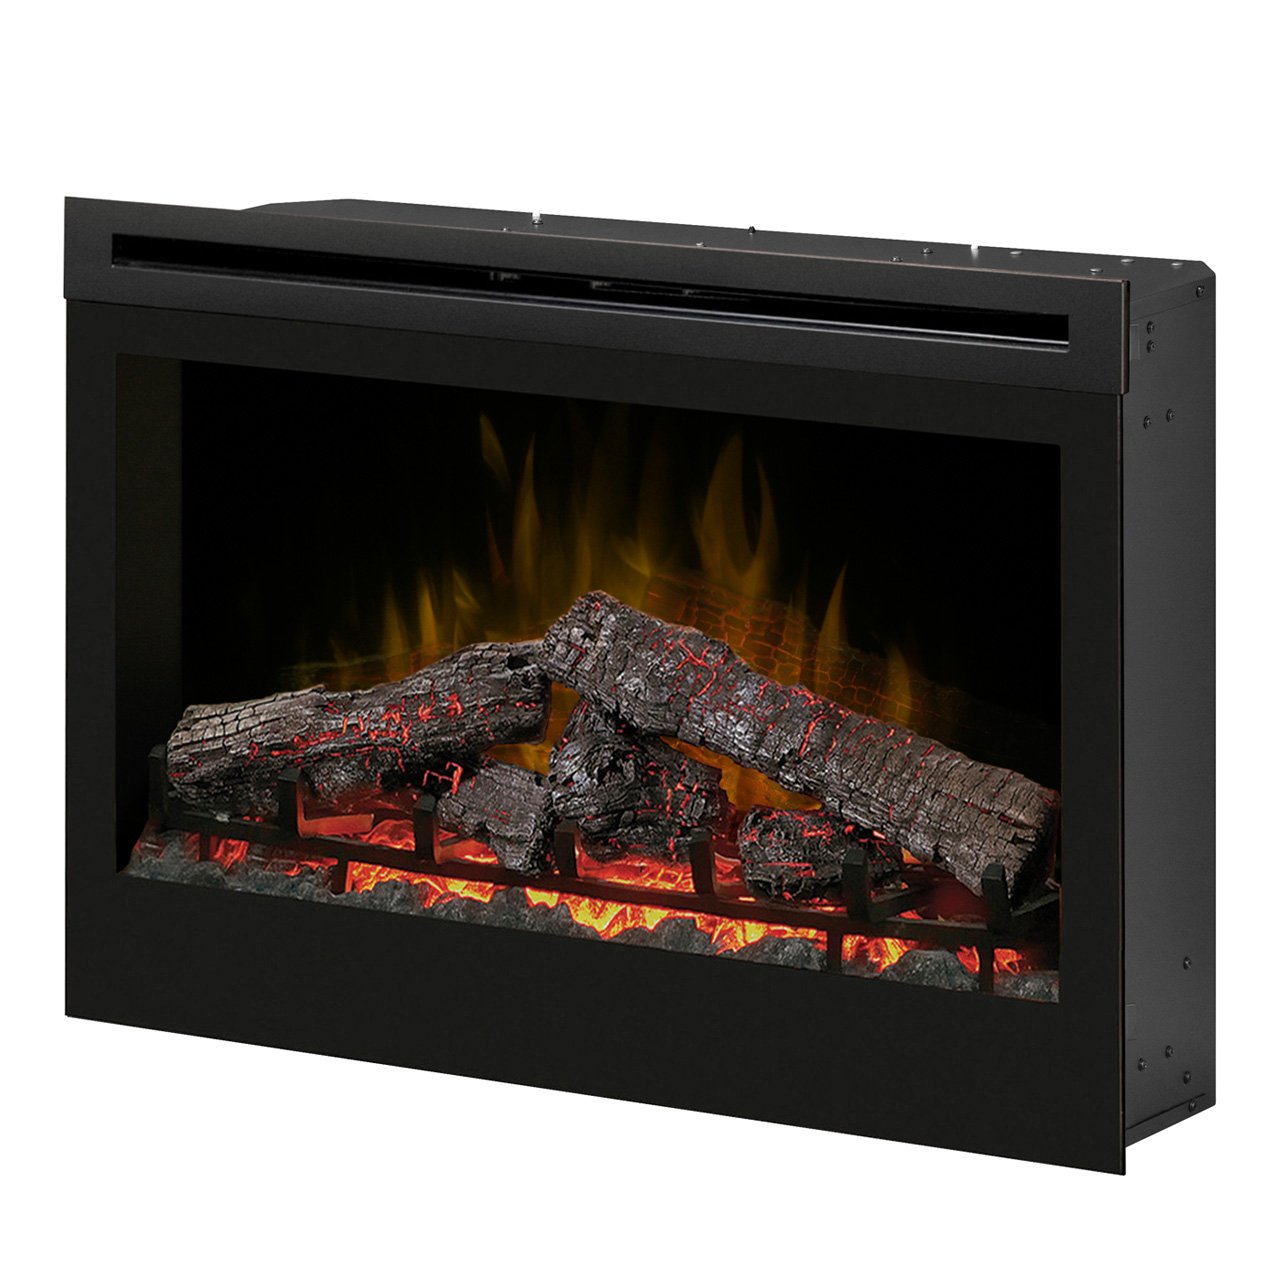 Gas Fireplaces for Sale New Dimplex Df3033st 33 Inch Self Trimming Electric Fireplace Insert